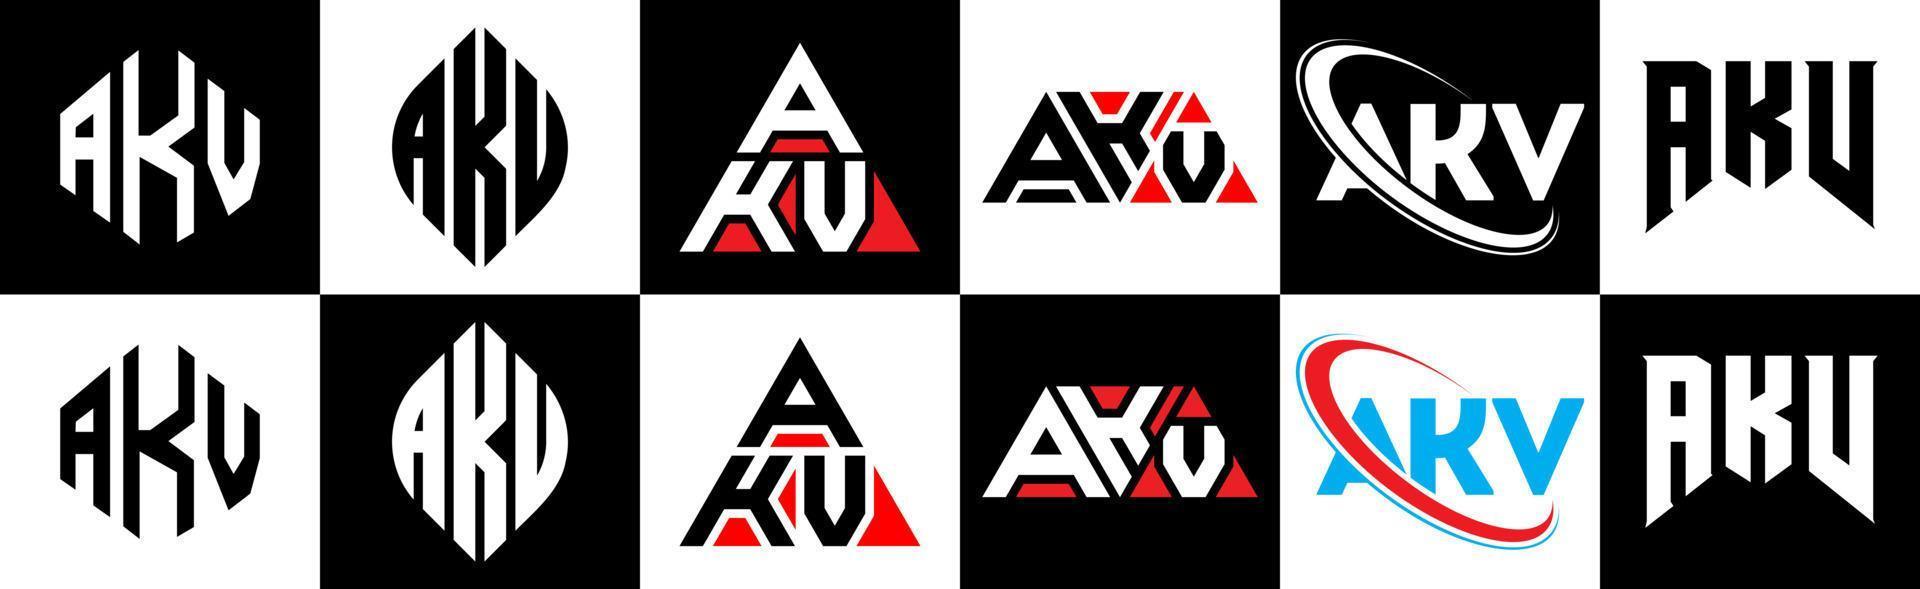 AKV letter logo design in six style. AKV polygon, circle, triangle, hexagon, flat and simple style with black and white color variation letter logo set in one artboard. AKV minimalist and classic logo vector